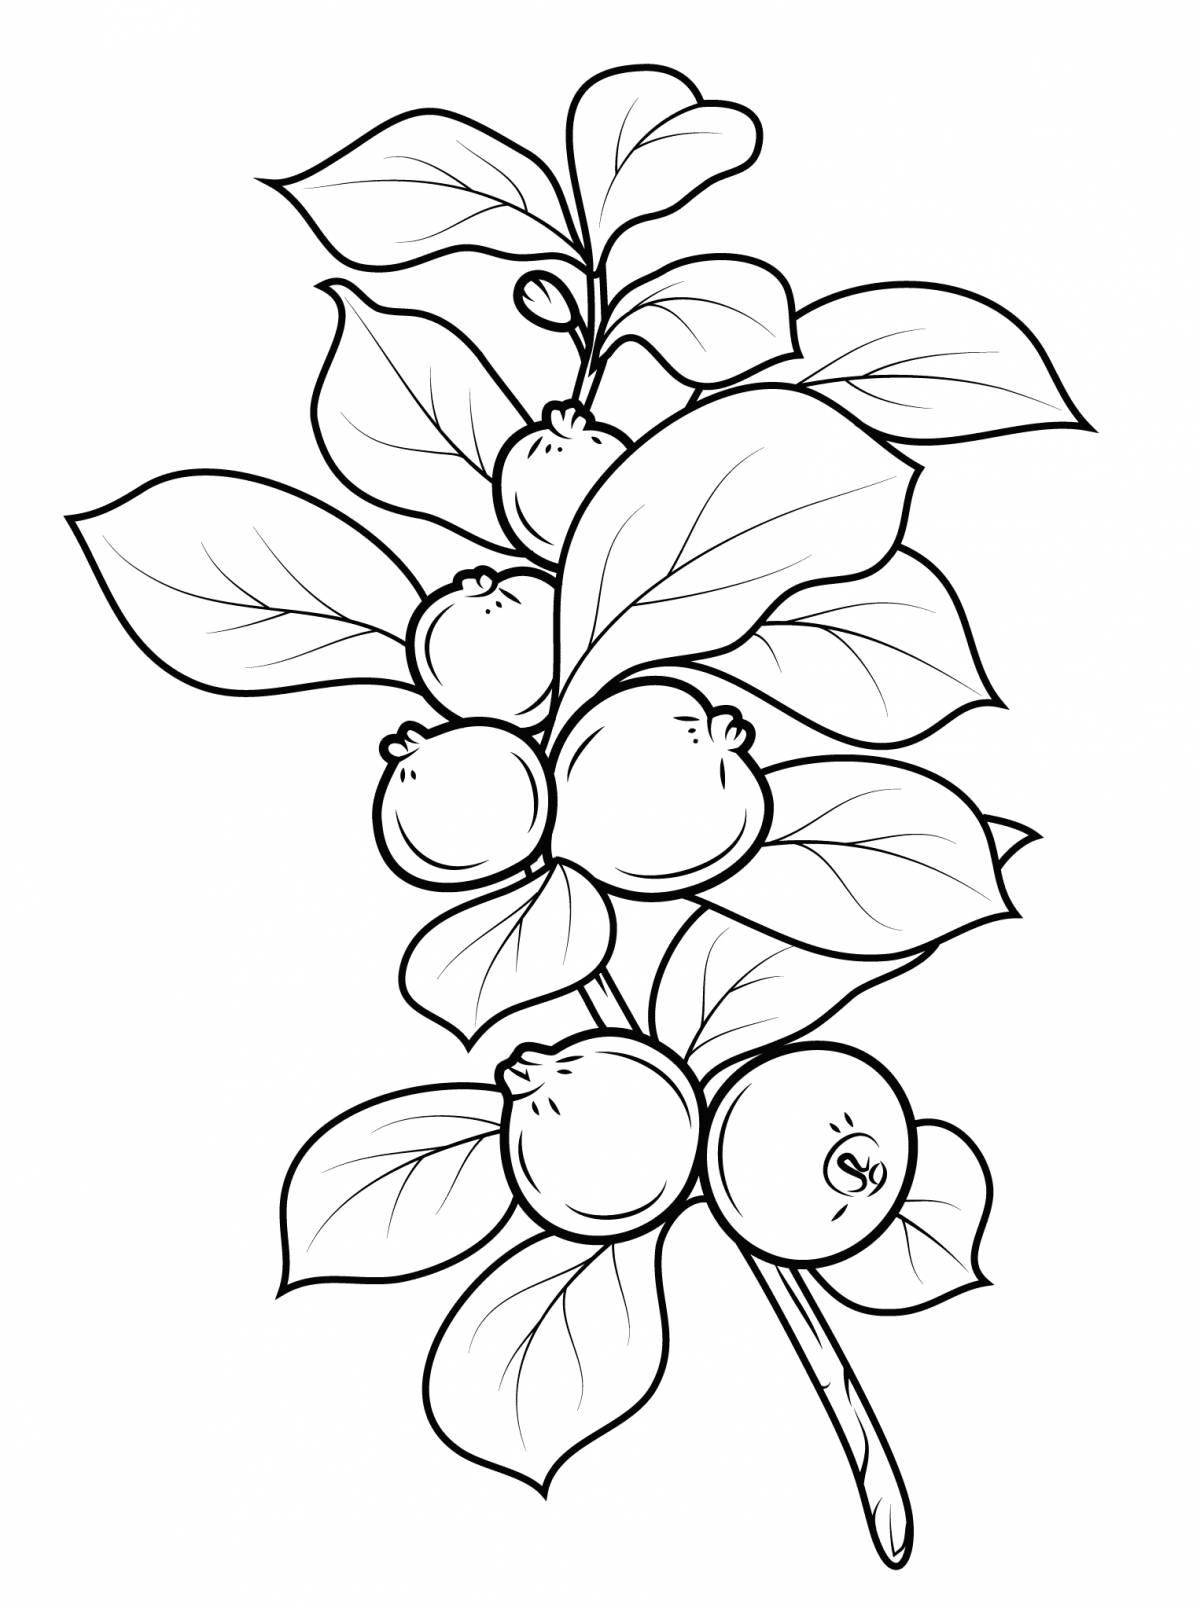 Colorful blueberry coloring pages for kids